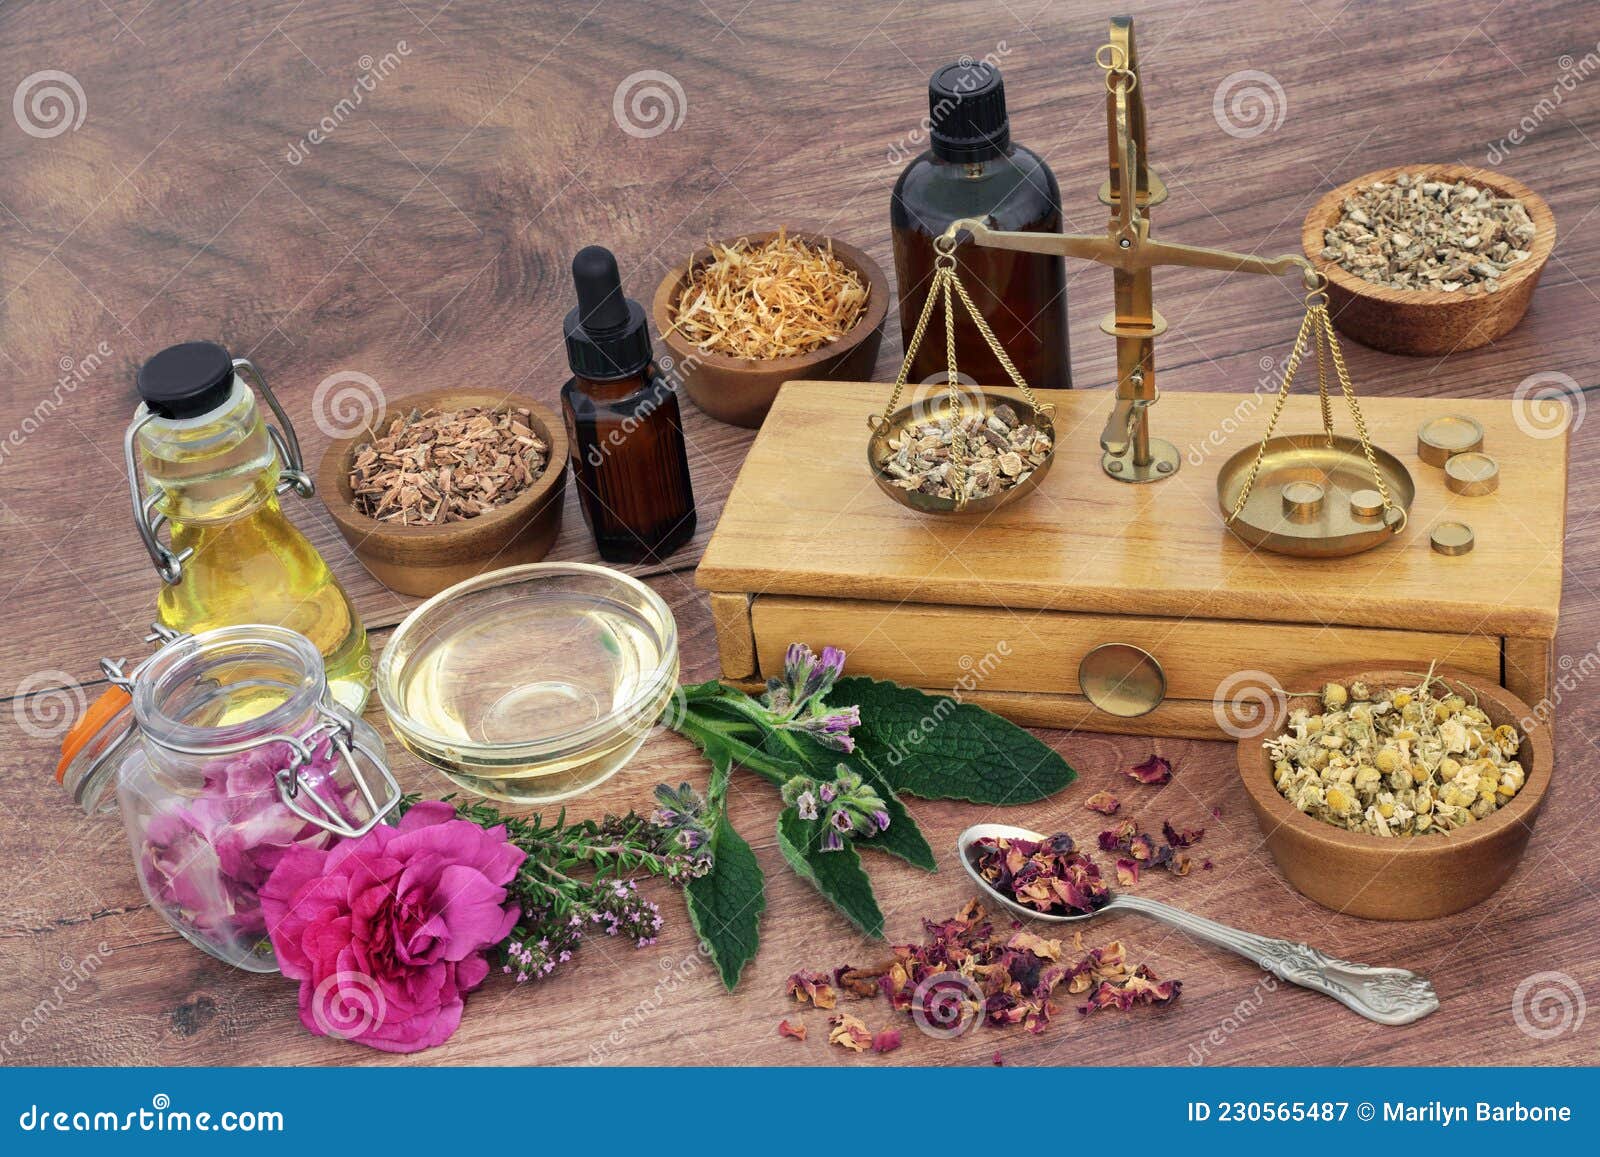 naturopathic healing herbs and flowers for skincare